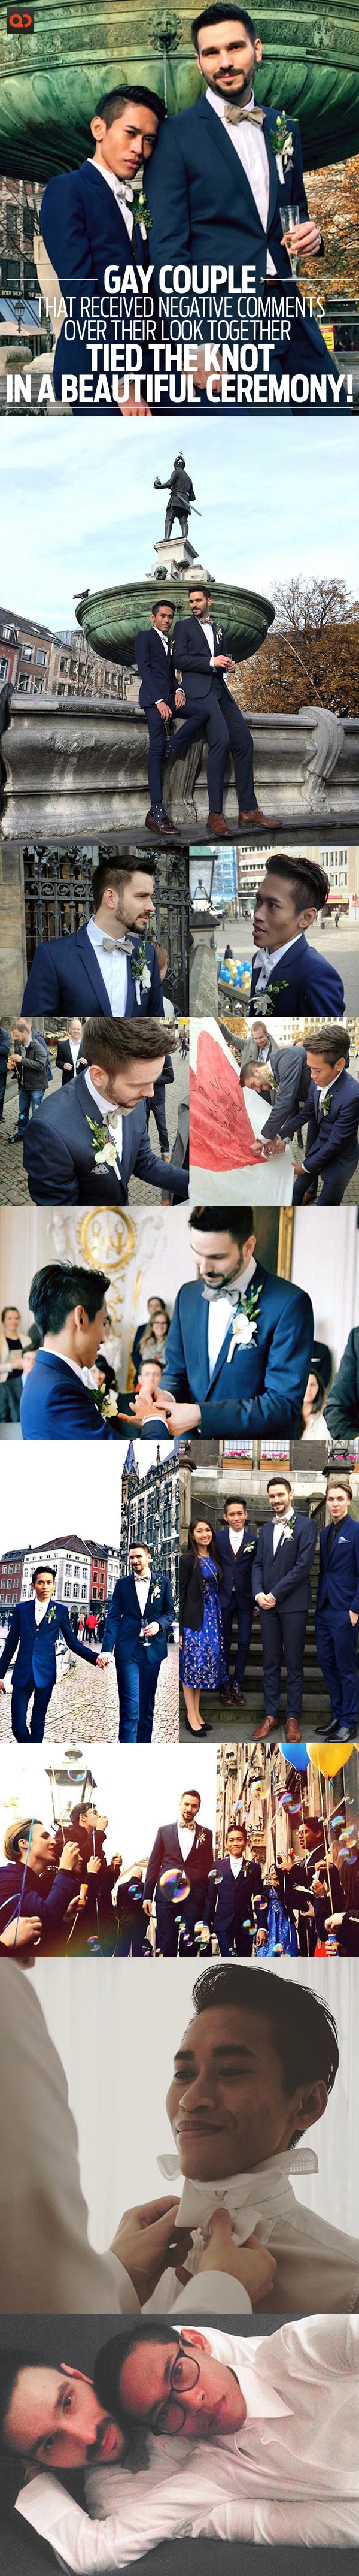 Gay Couple That Received Negative Comments Over Their Look Together Tied The Knot In A Beautiful Ceremony!